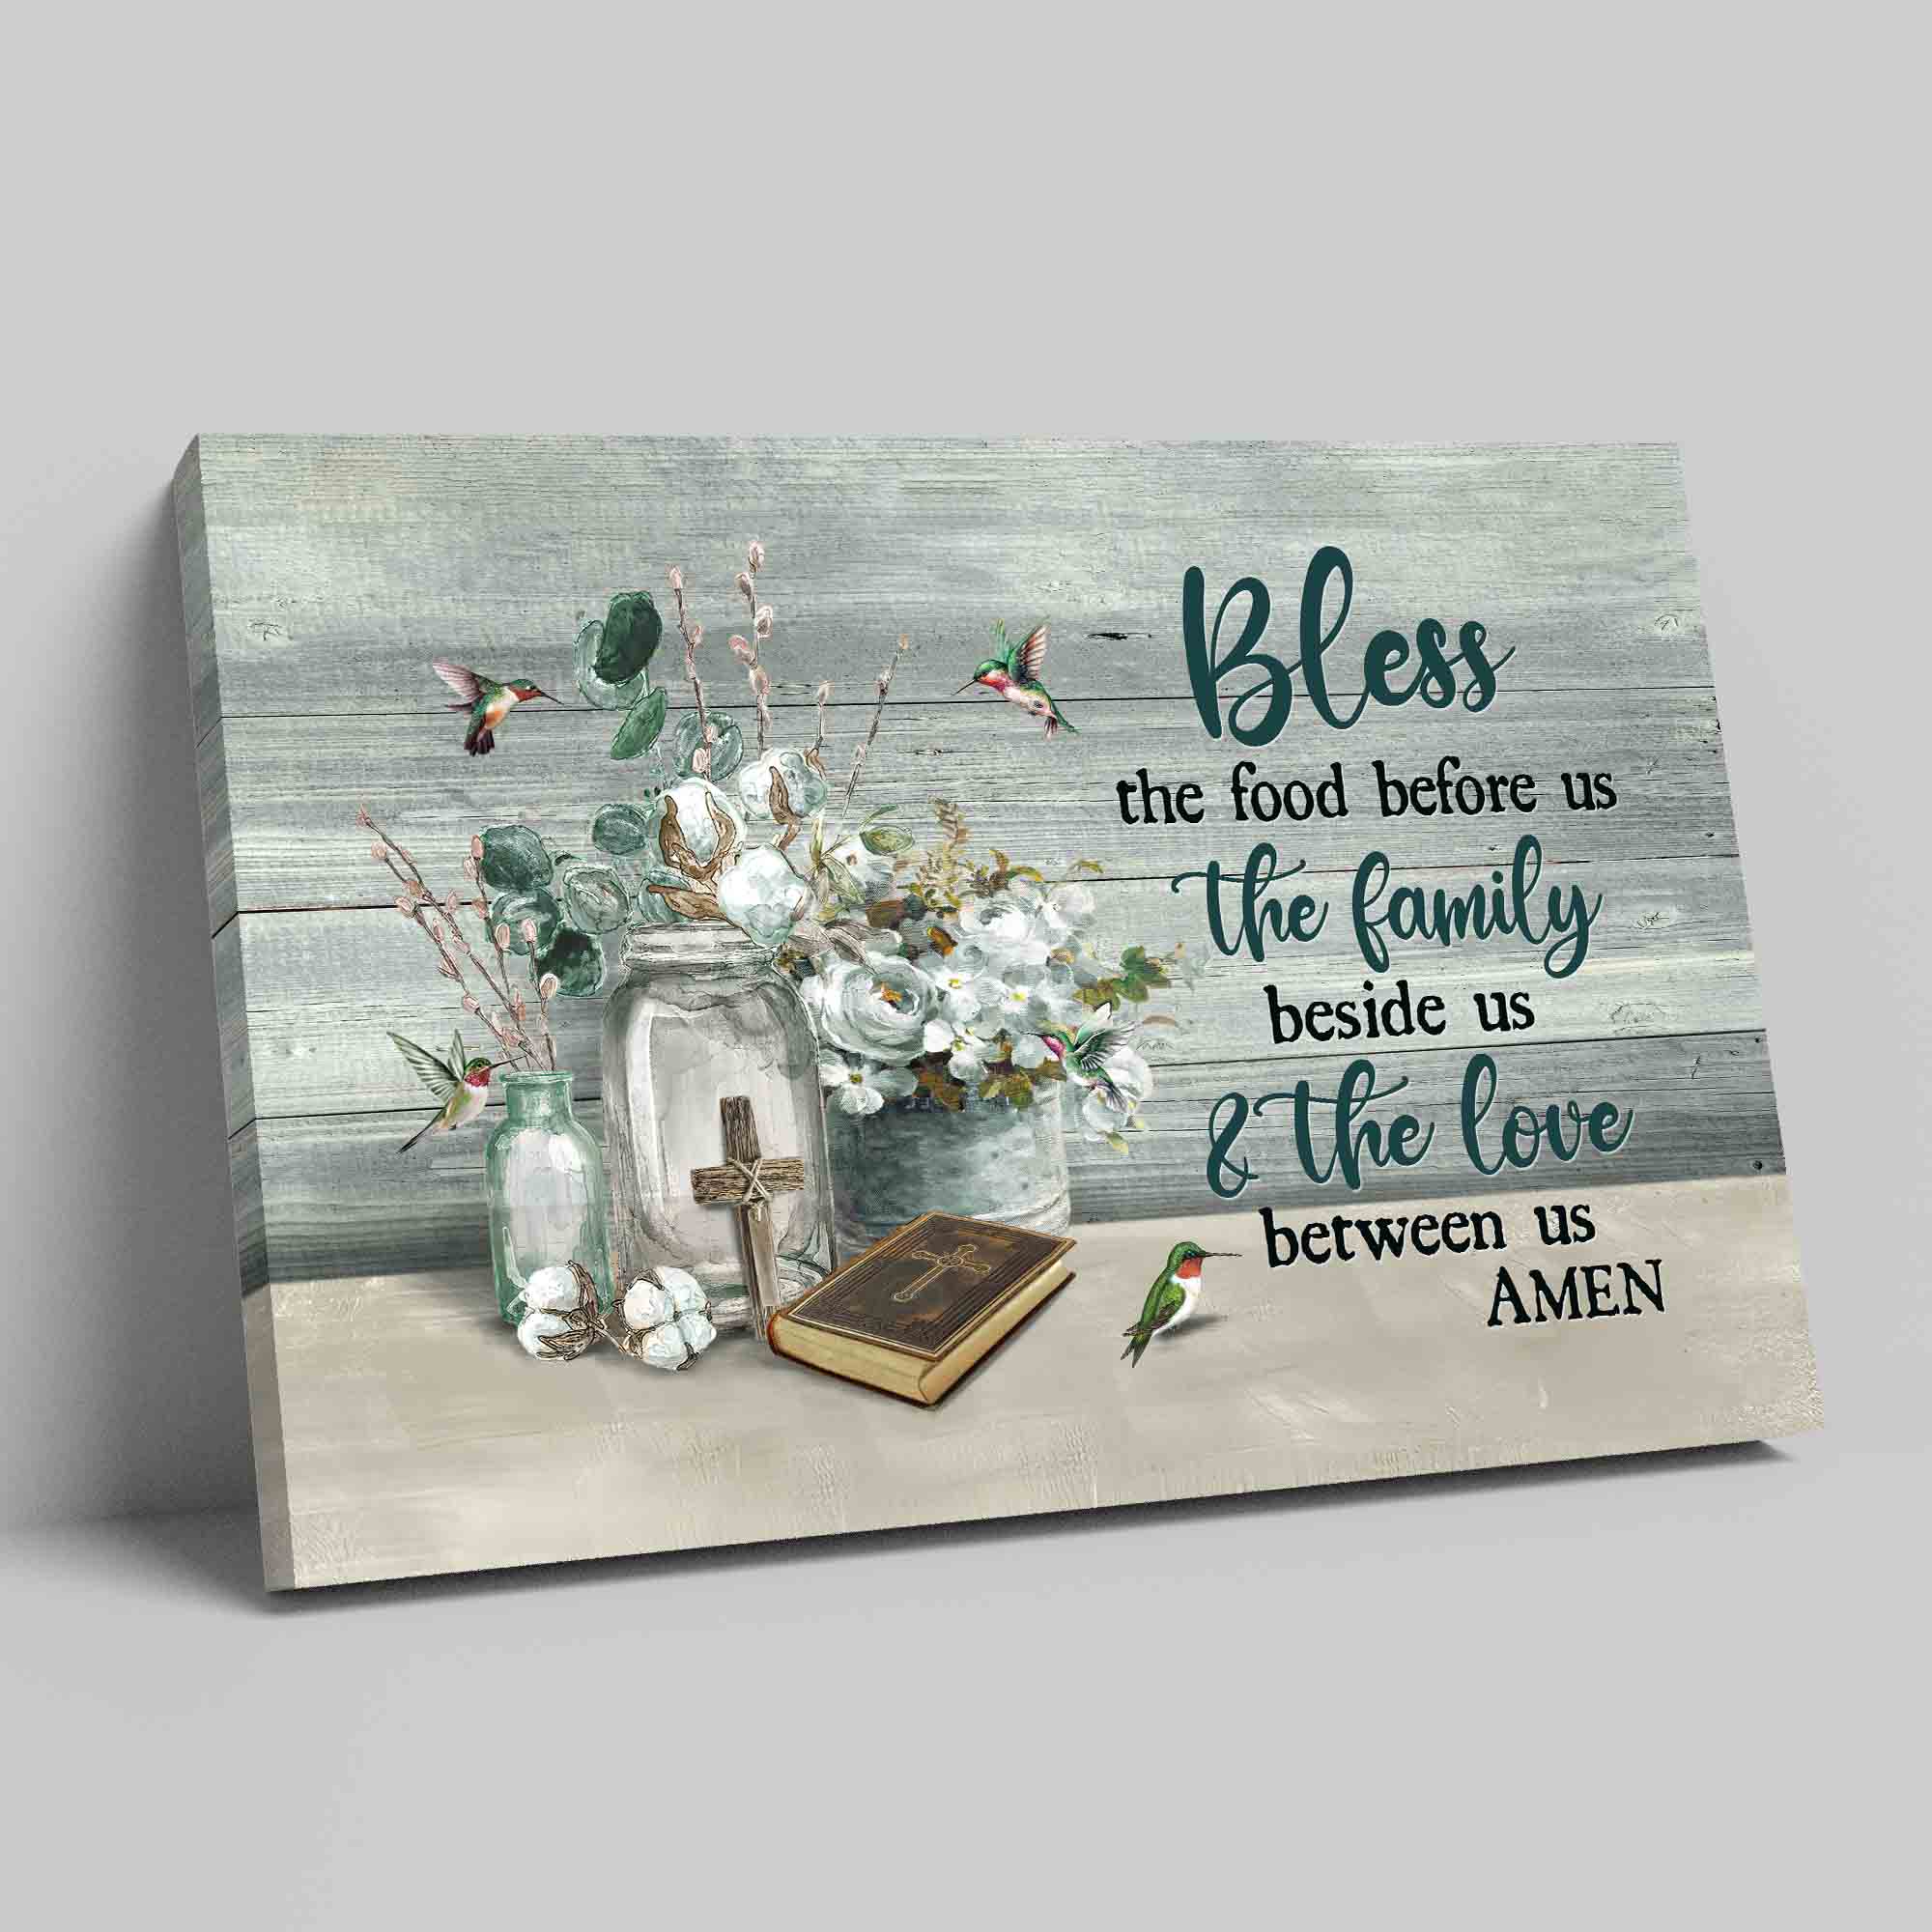 Bless The Food Before Us Canvas, Flower Canvas, Vintage Bible Canvas, Hummingbird Canvas, Christian Wall Art Canvas, Canvas Wall Decor, Gift Canvas